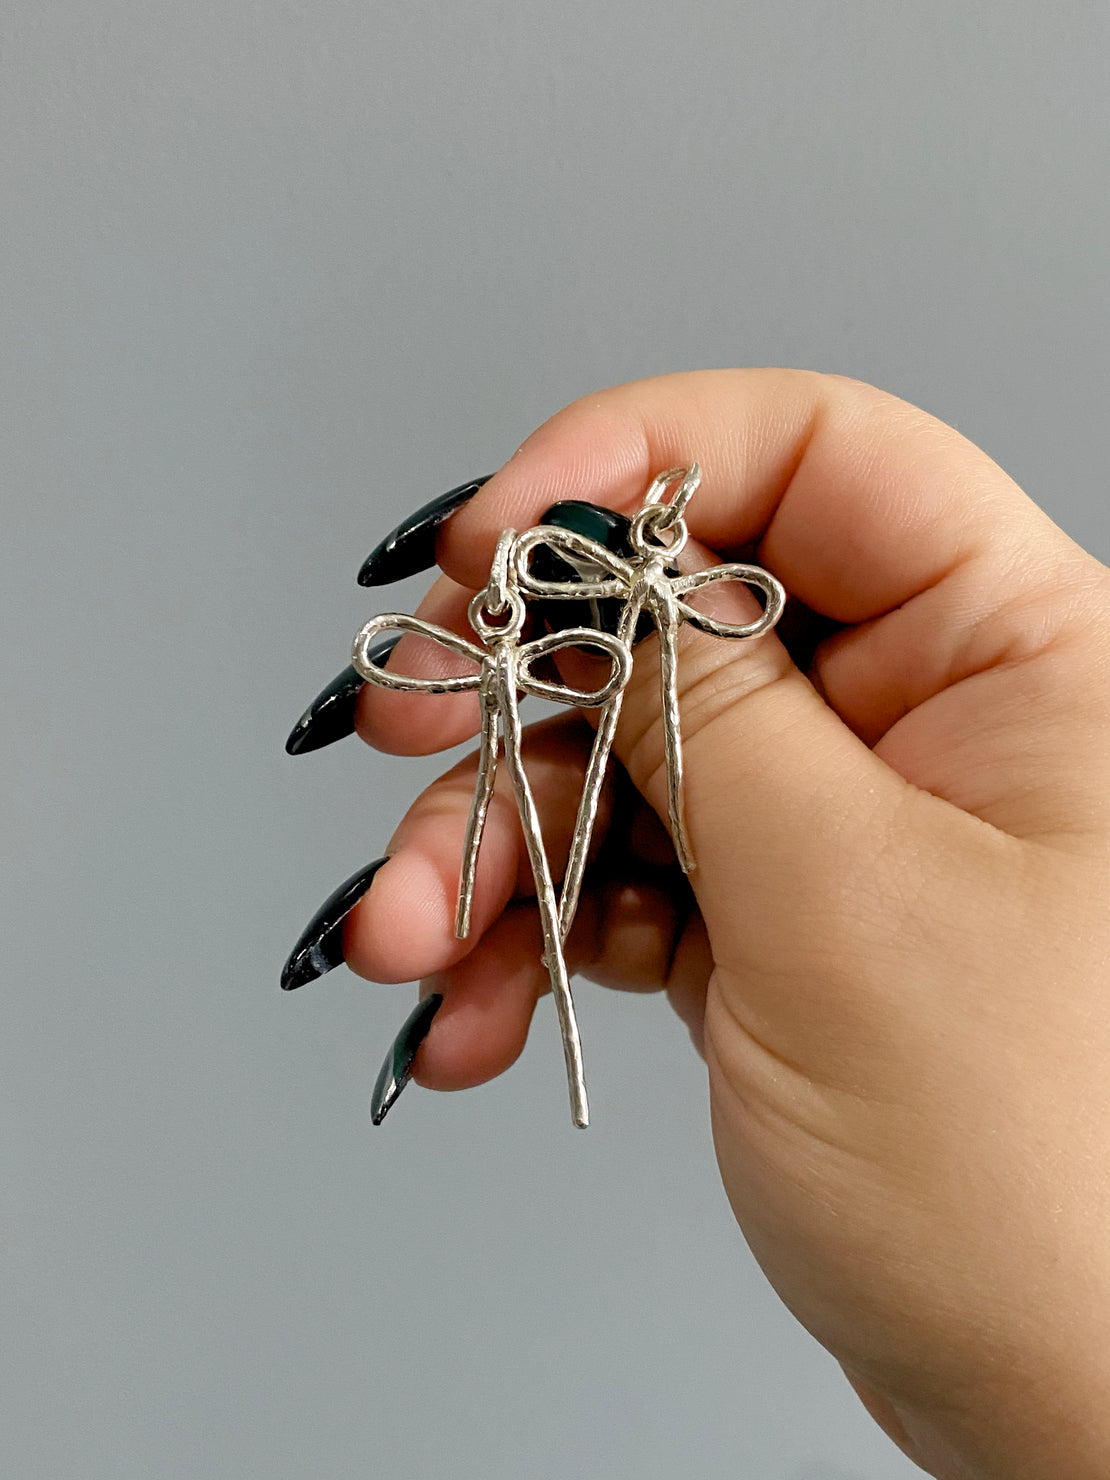 Sterling silver bow earrings in hand with long nails